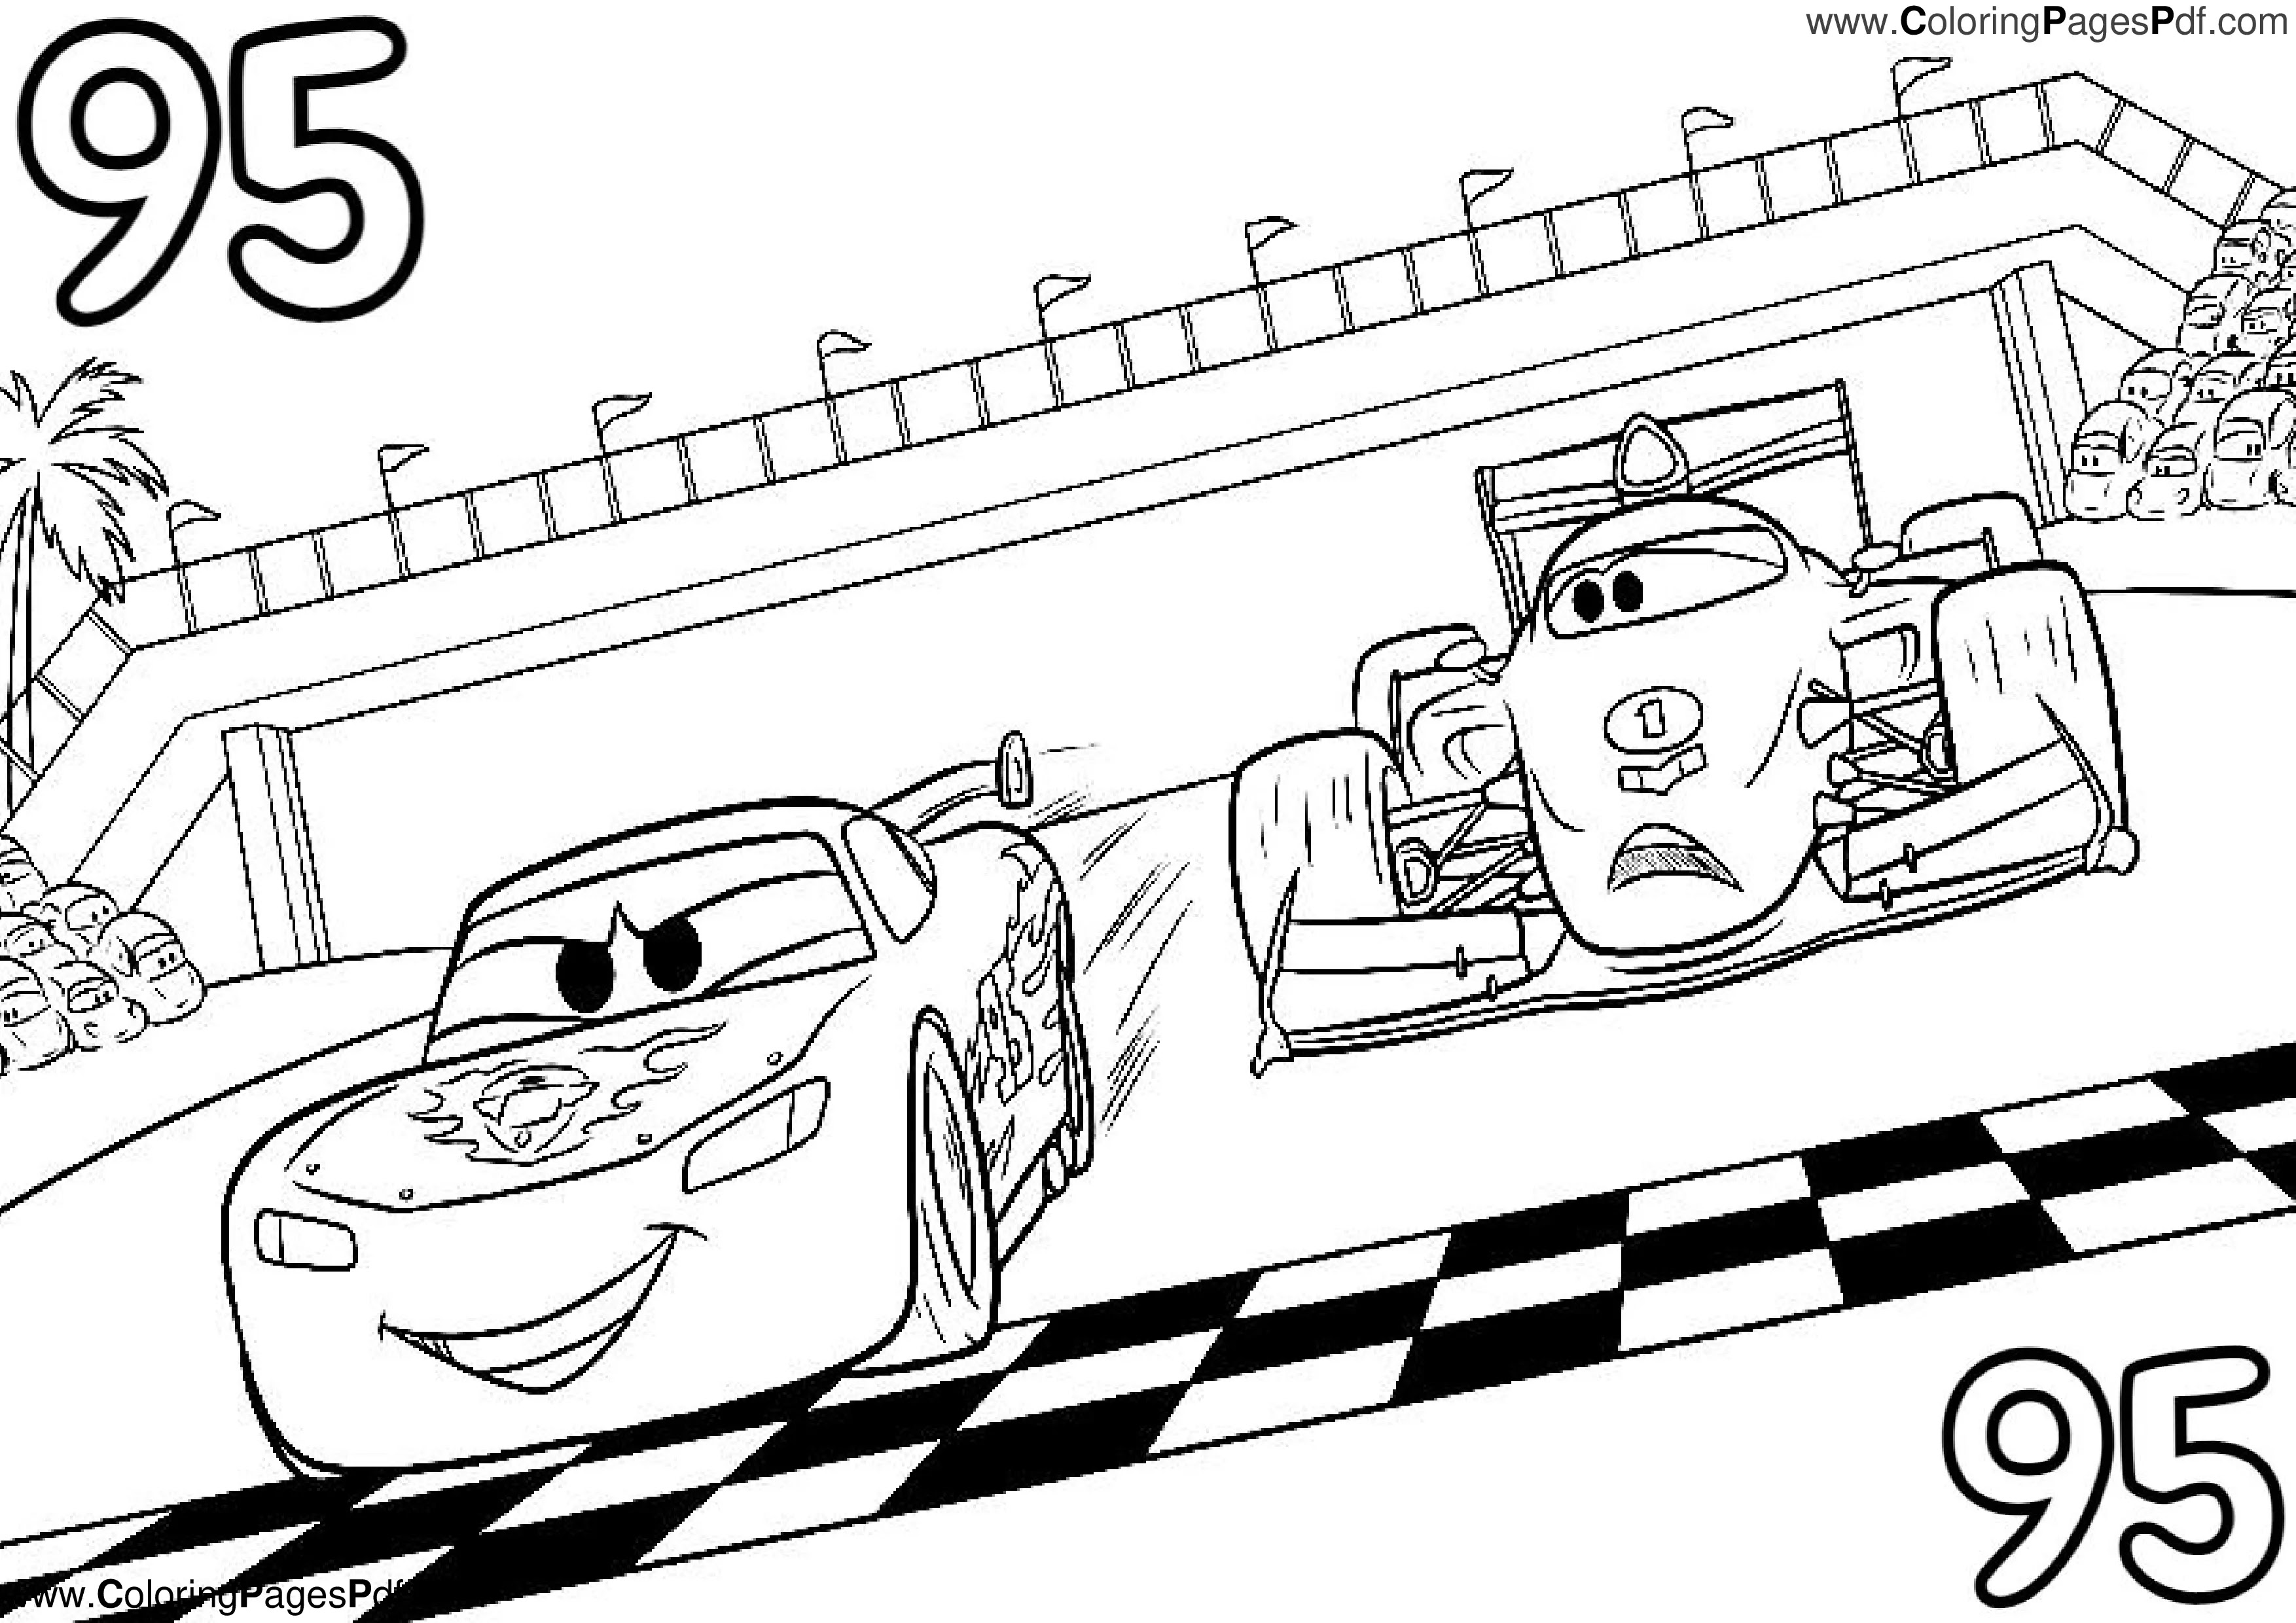 Lightning mcQueen coloring pages printable pdf